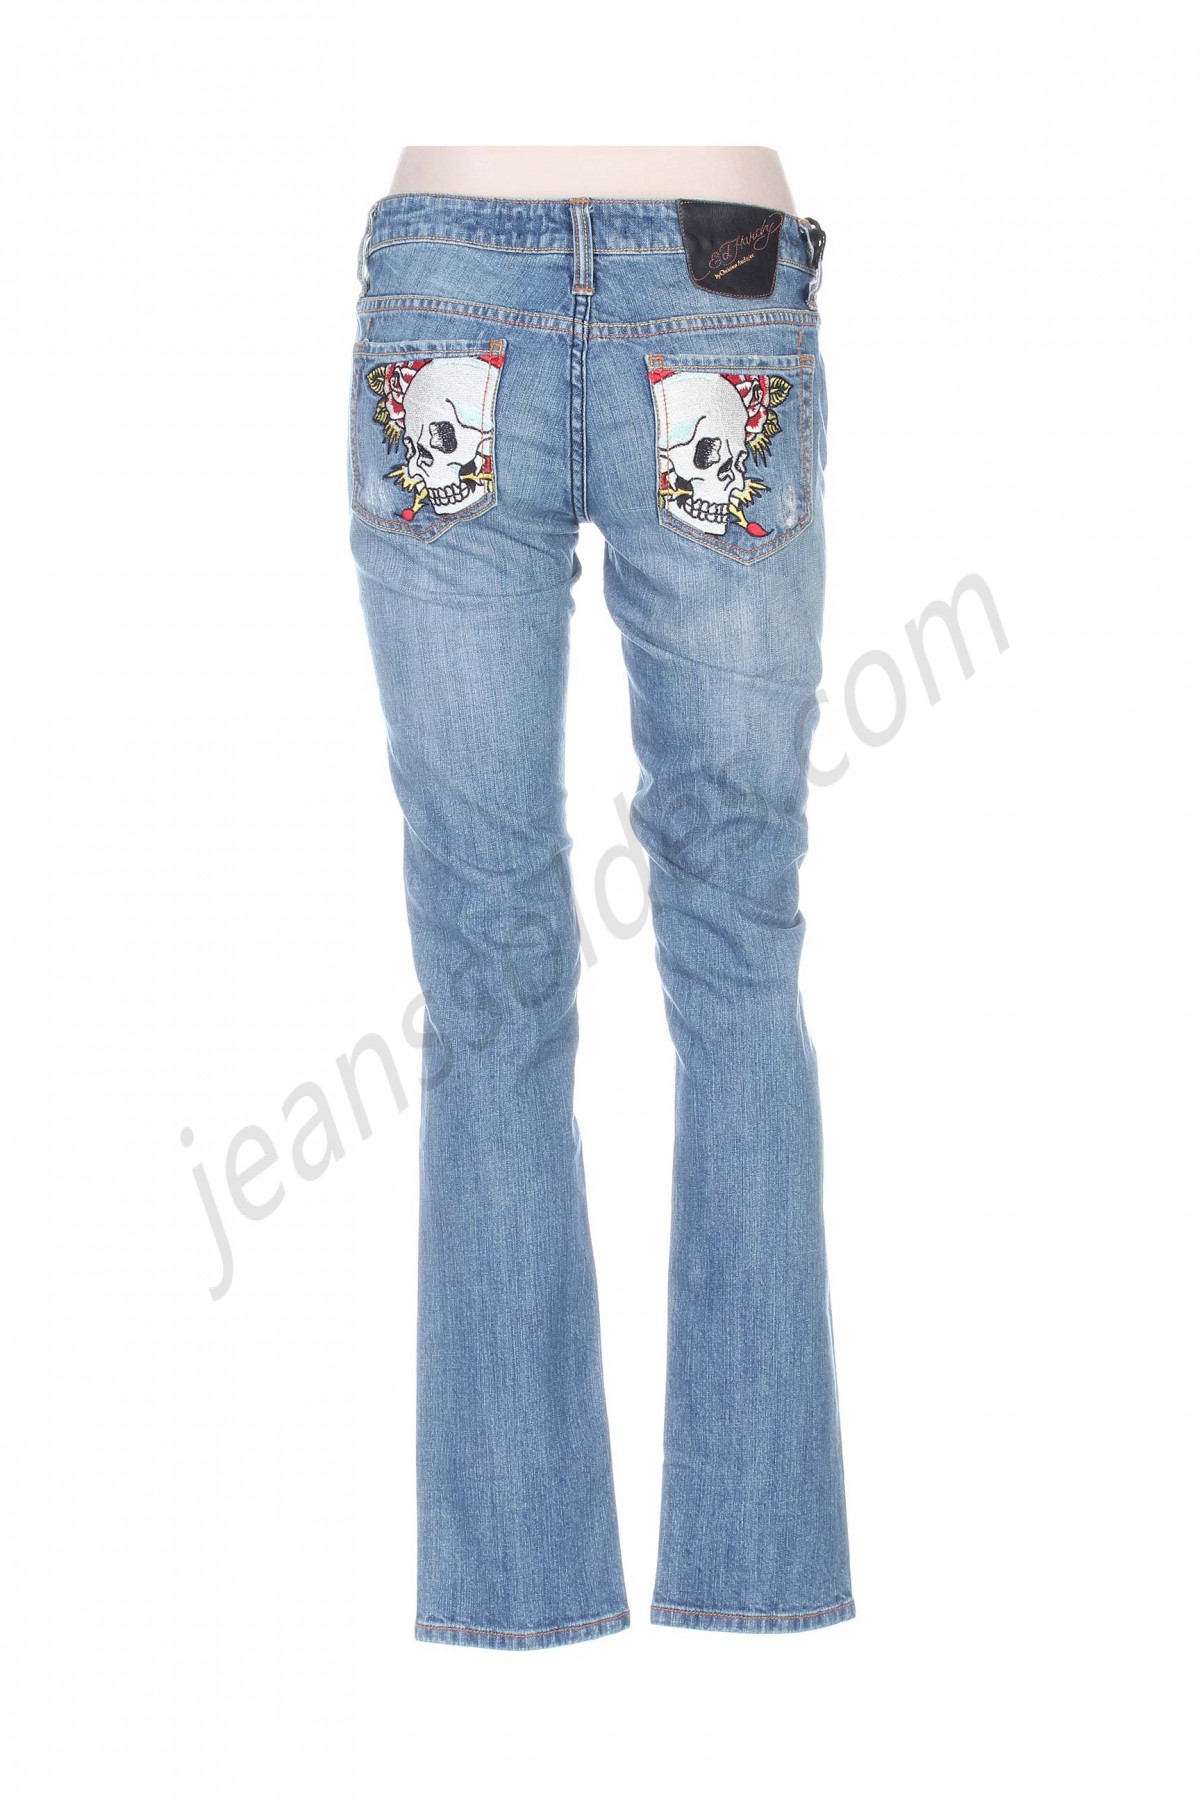 ed hardy-Jeans coupe slim prix d’amis - -1